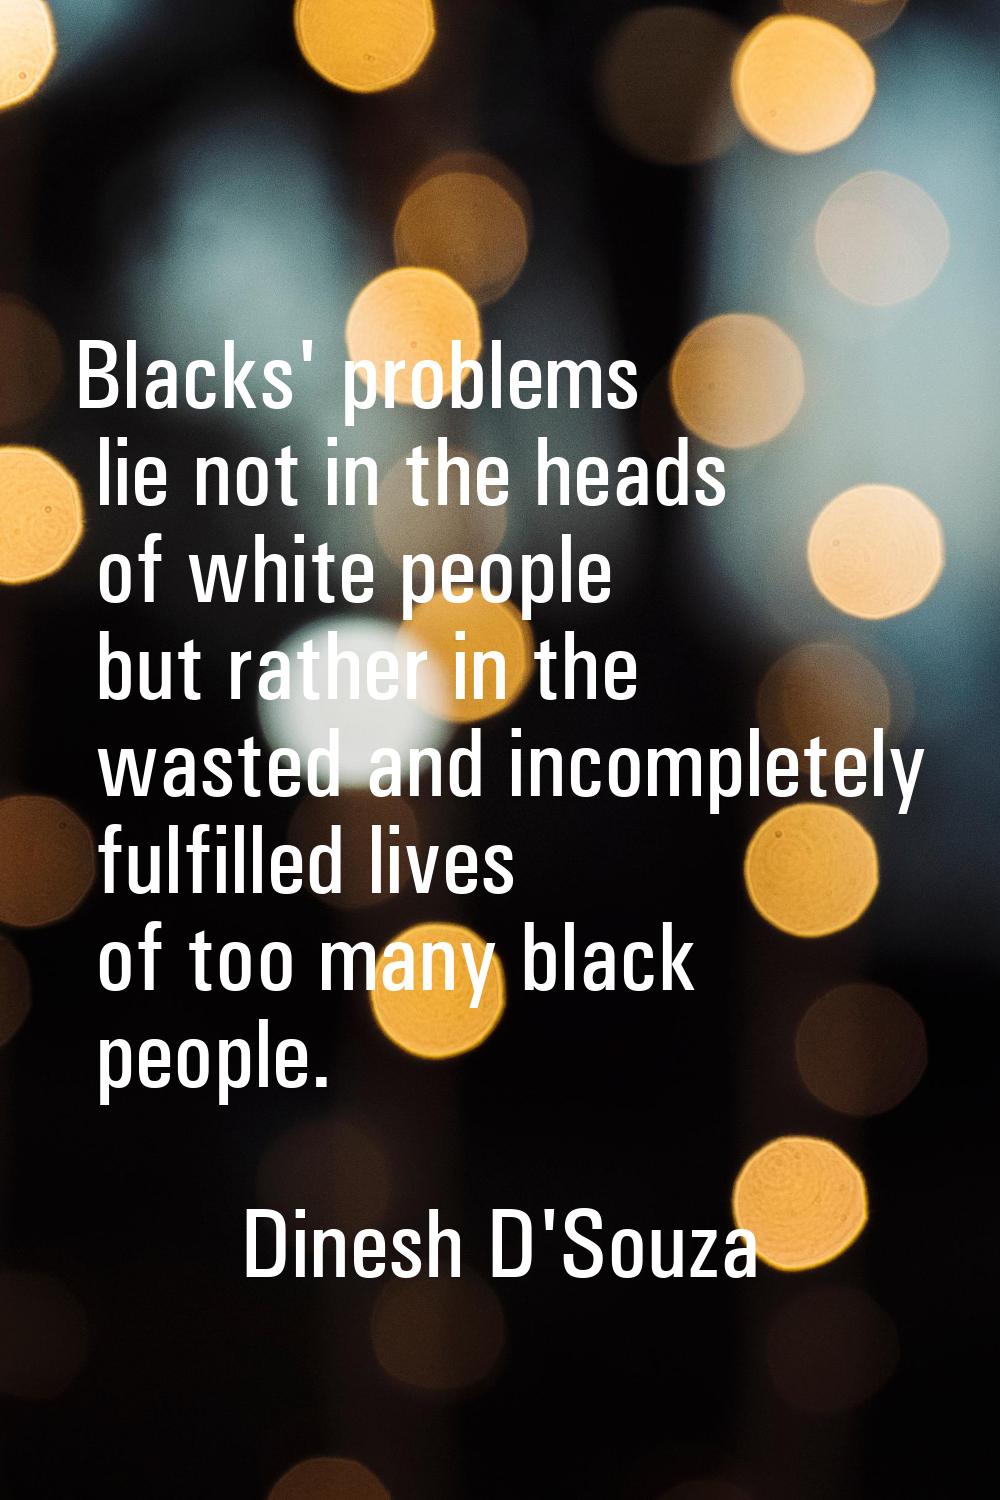 Blacks' problems lie not in the heads of white people but rather in the wasted and incompletely ful